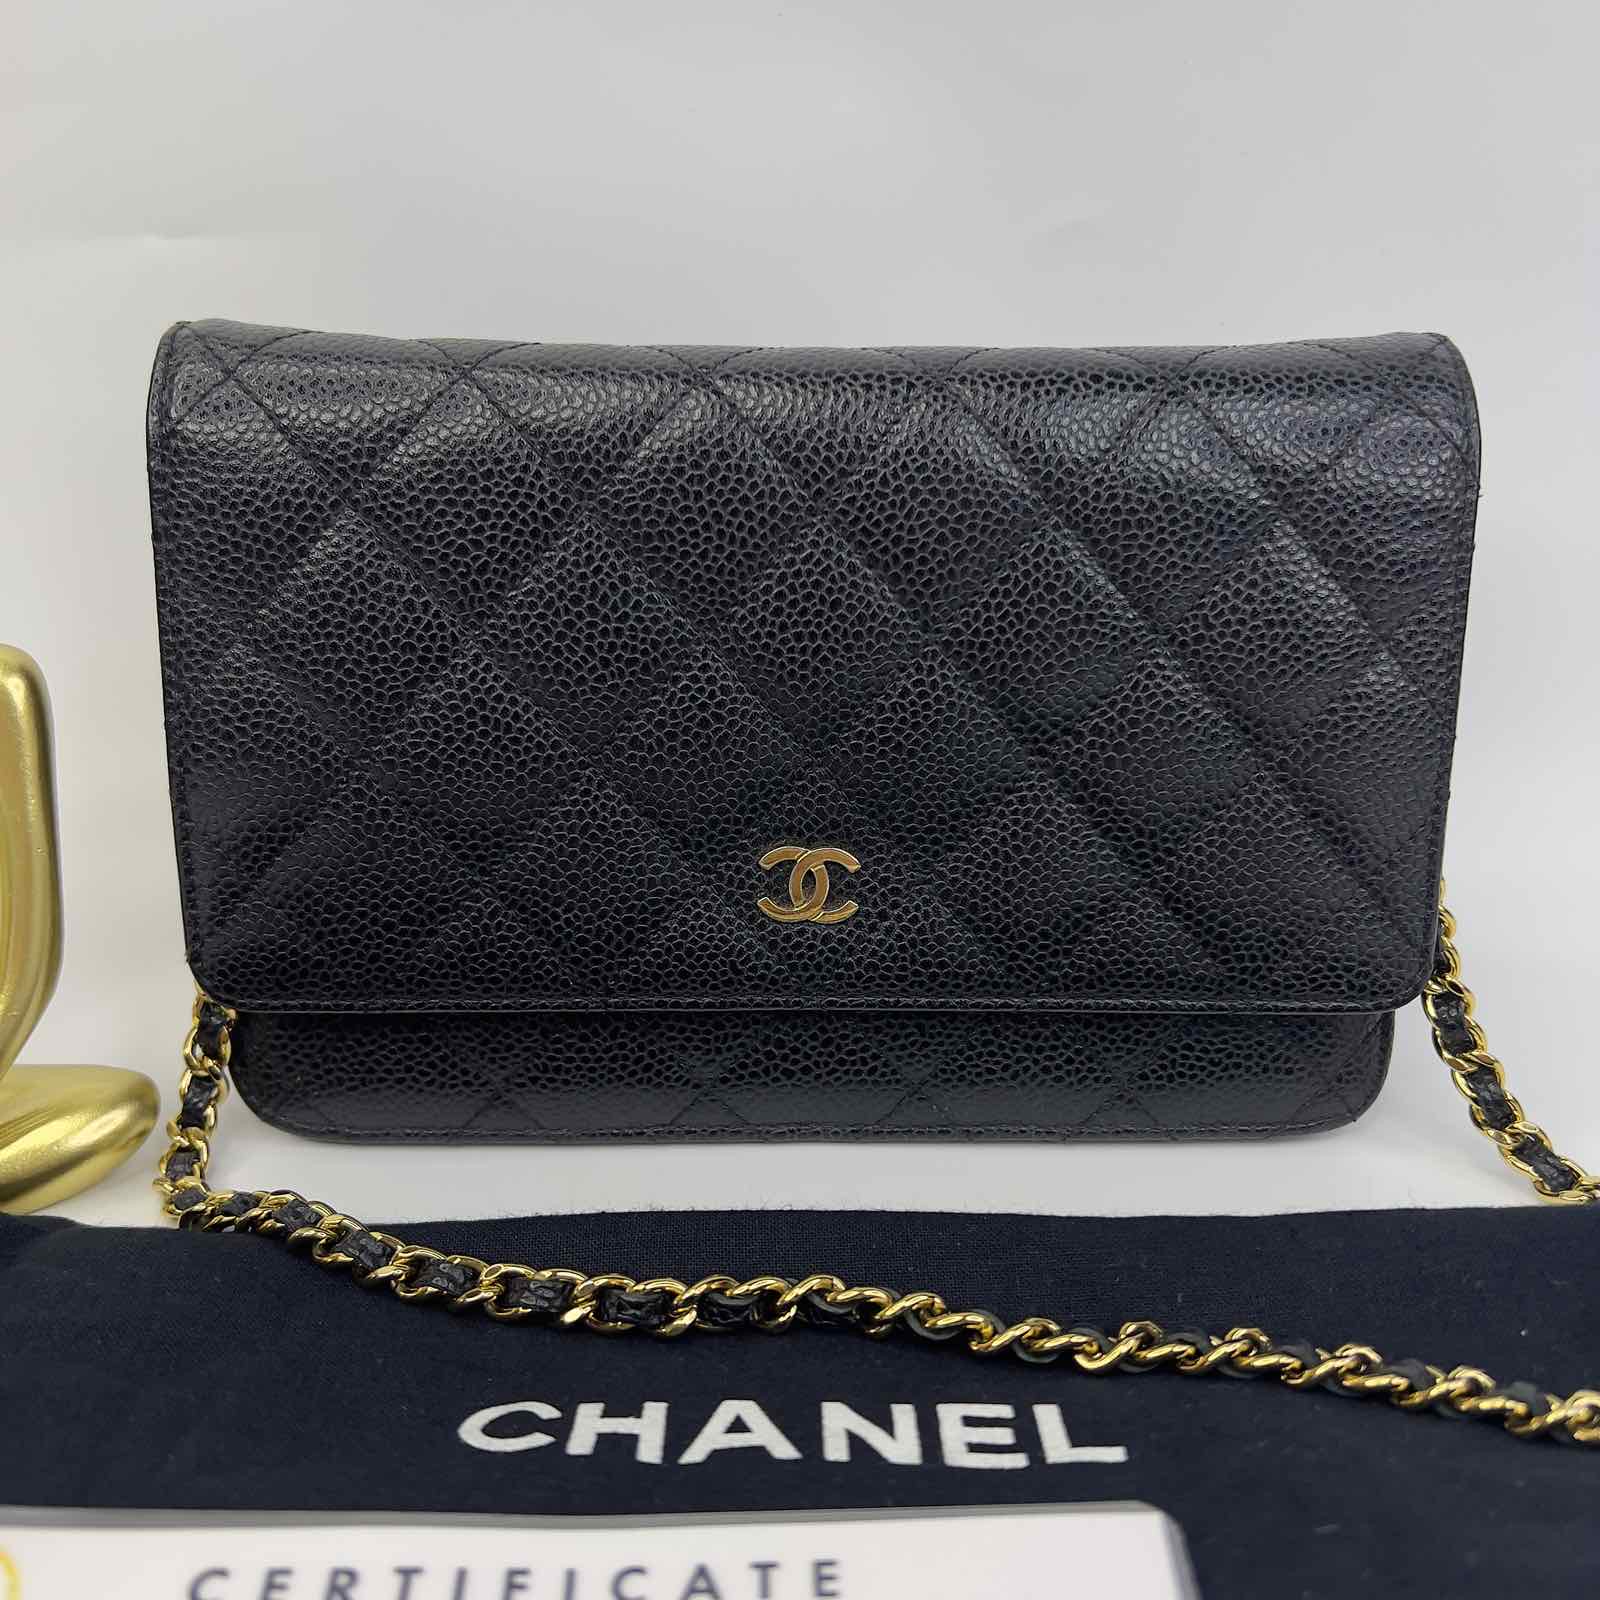 SOLD/LAYAWAY💕 Chanel Black Caviar Wallet on Chain Gold Hardware. Series  21xxxxxx. Made in France. With authenticity card, dustbag & certificate of  authenticity from ENTRUPY ❤️ - Canon E-Bags Prime